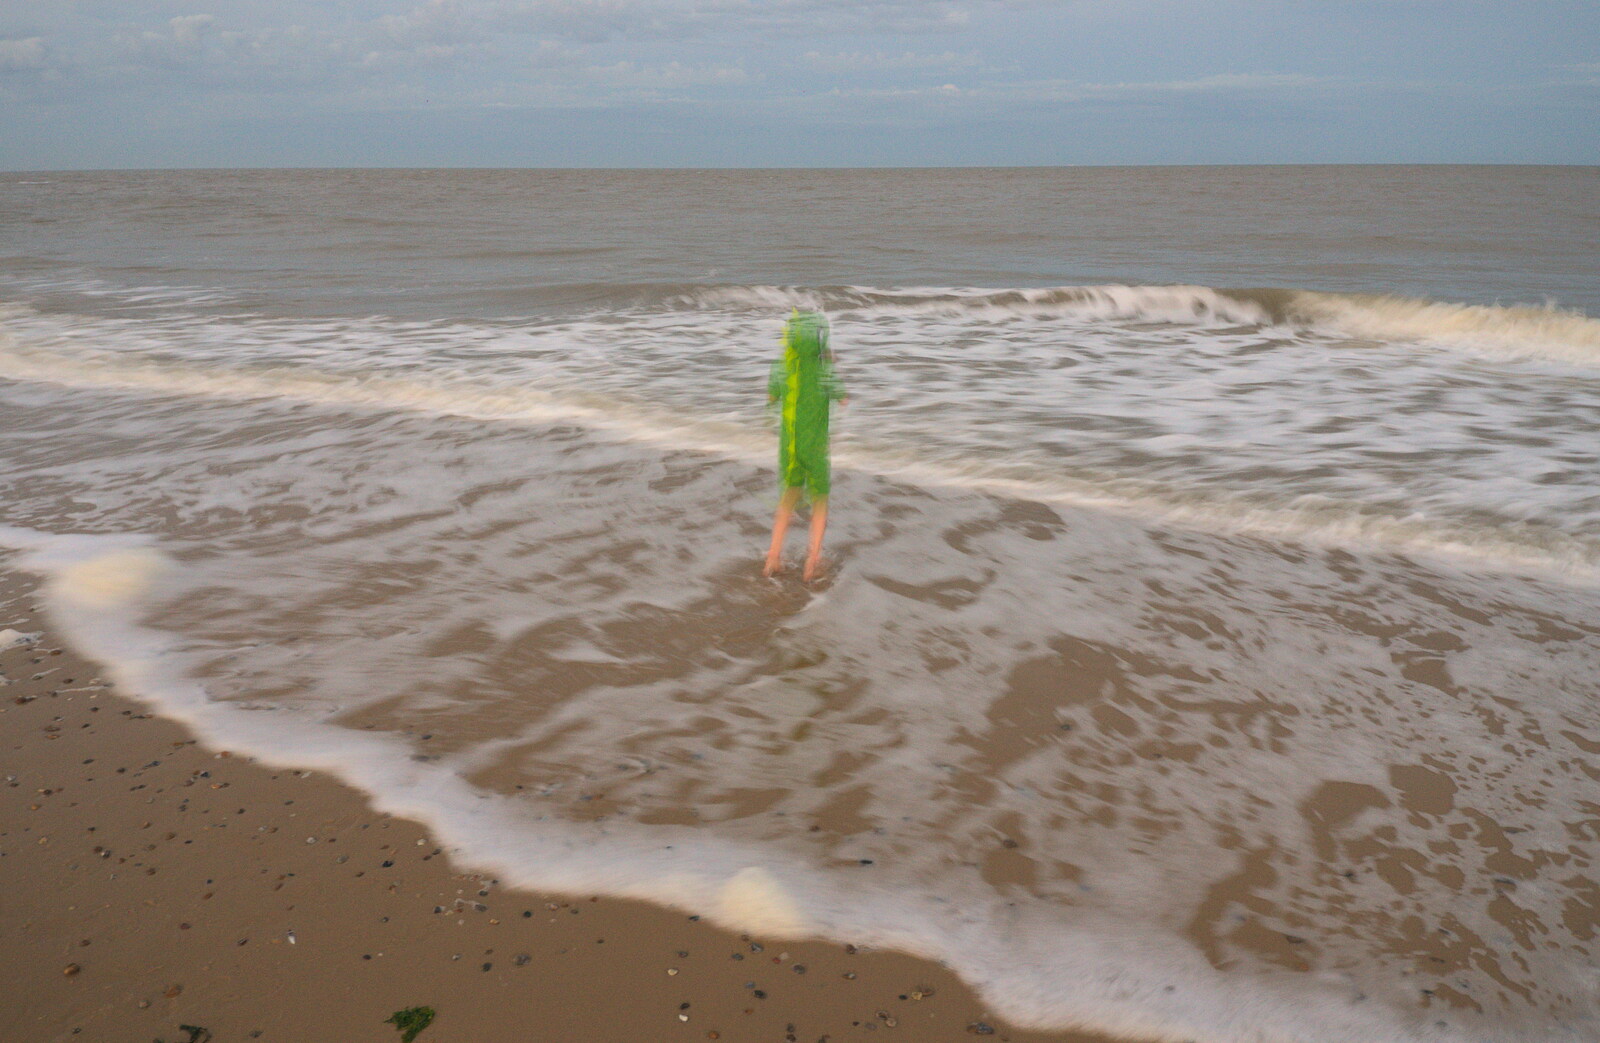 Fred in the sea from The Danger of Trees: A Camping (Mis)adventure - Southwold, Suffolk - 3rd August 2015